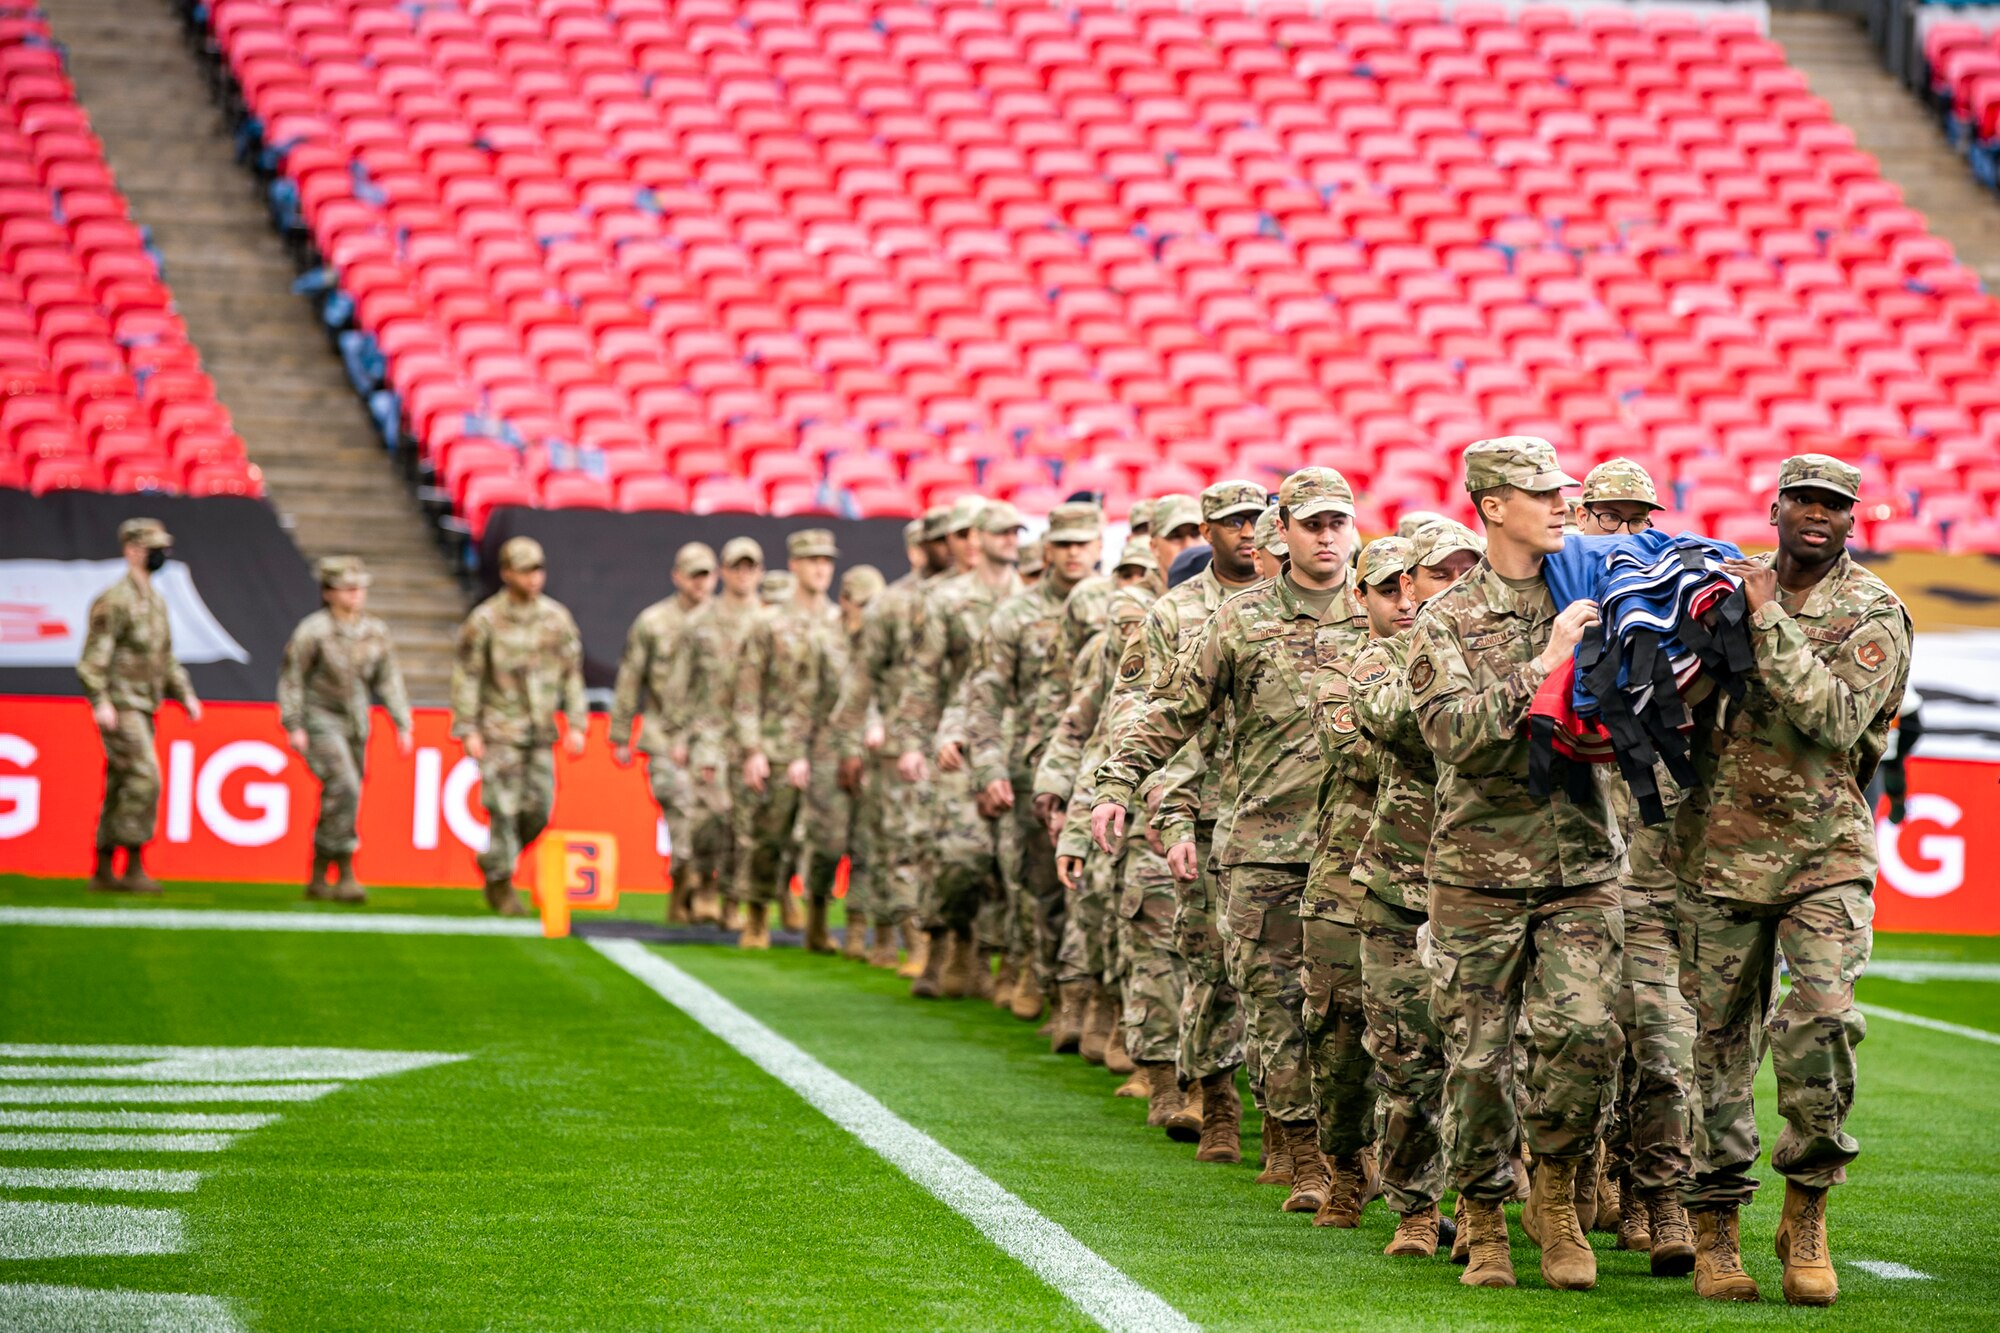 Airmen from the 501st Combat Support Wing carry an American flag onto the field during national anthem rehearsal at Wembley Stadium, in London, England, Oct. 30, 2022. Approximately 70 uniformed personnel represented the U.S. Air Force and nation by unveiling an American flag during the pre-game ceremonies of the Jacksonville Jaguars and Denver Broncos NFL game. (U.S. Air Force photo by Staff Sgt. Eugene Oliver)